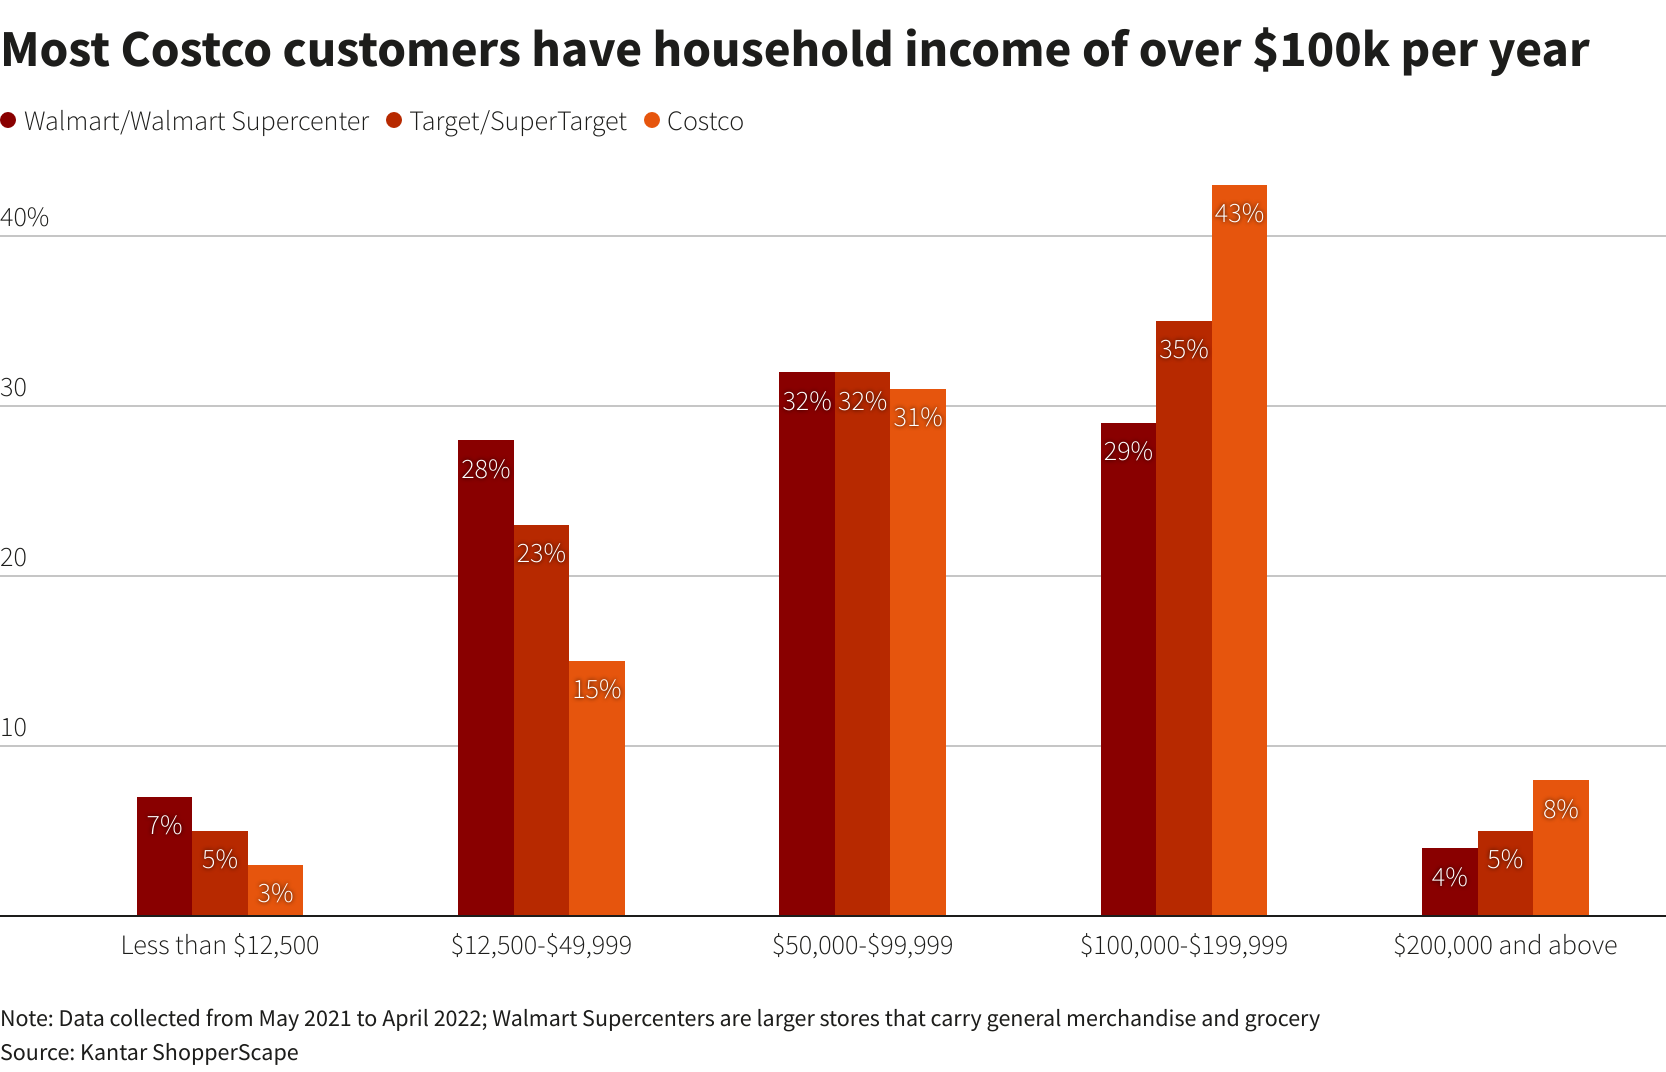 Most of Costco customers have household income of over $100k a year –